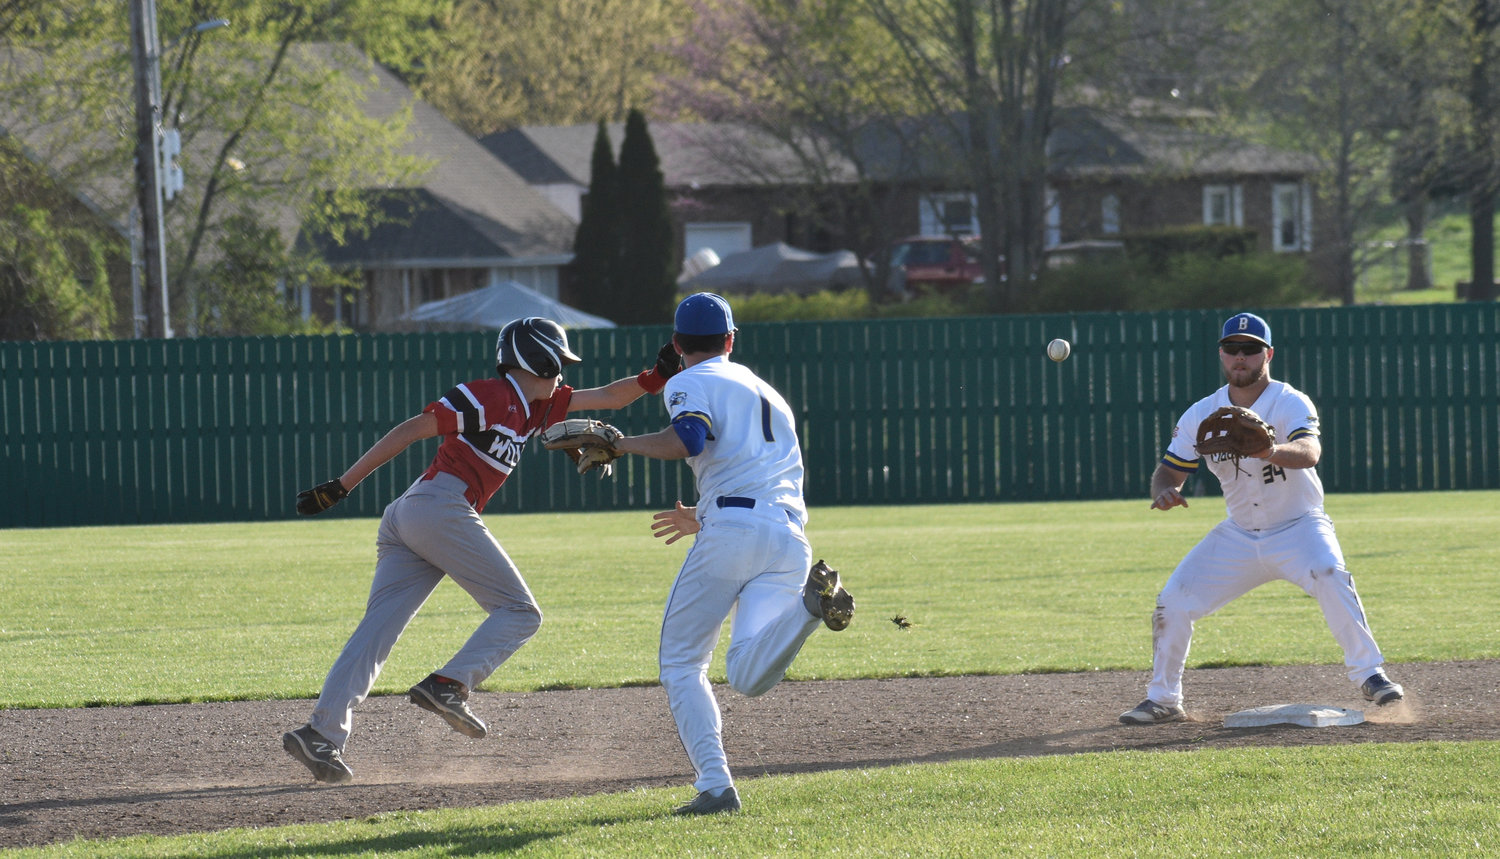 Shortstop Deacon Sharp catches a Reeds Spring player overrunning second base and throws to second baseman EJ Ingram for the out.